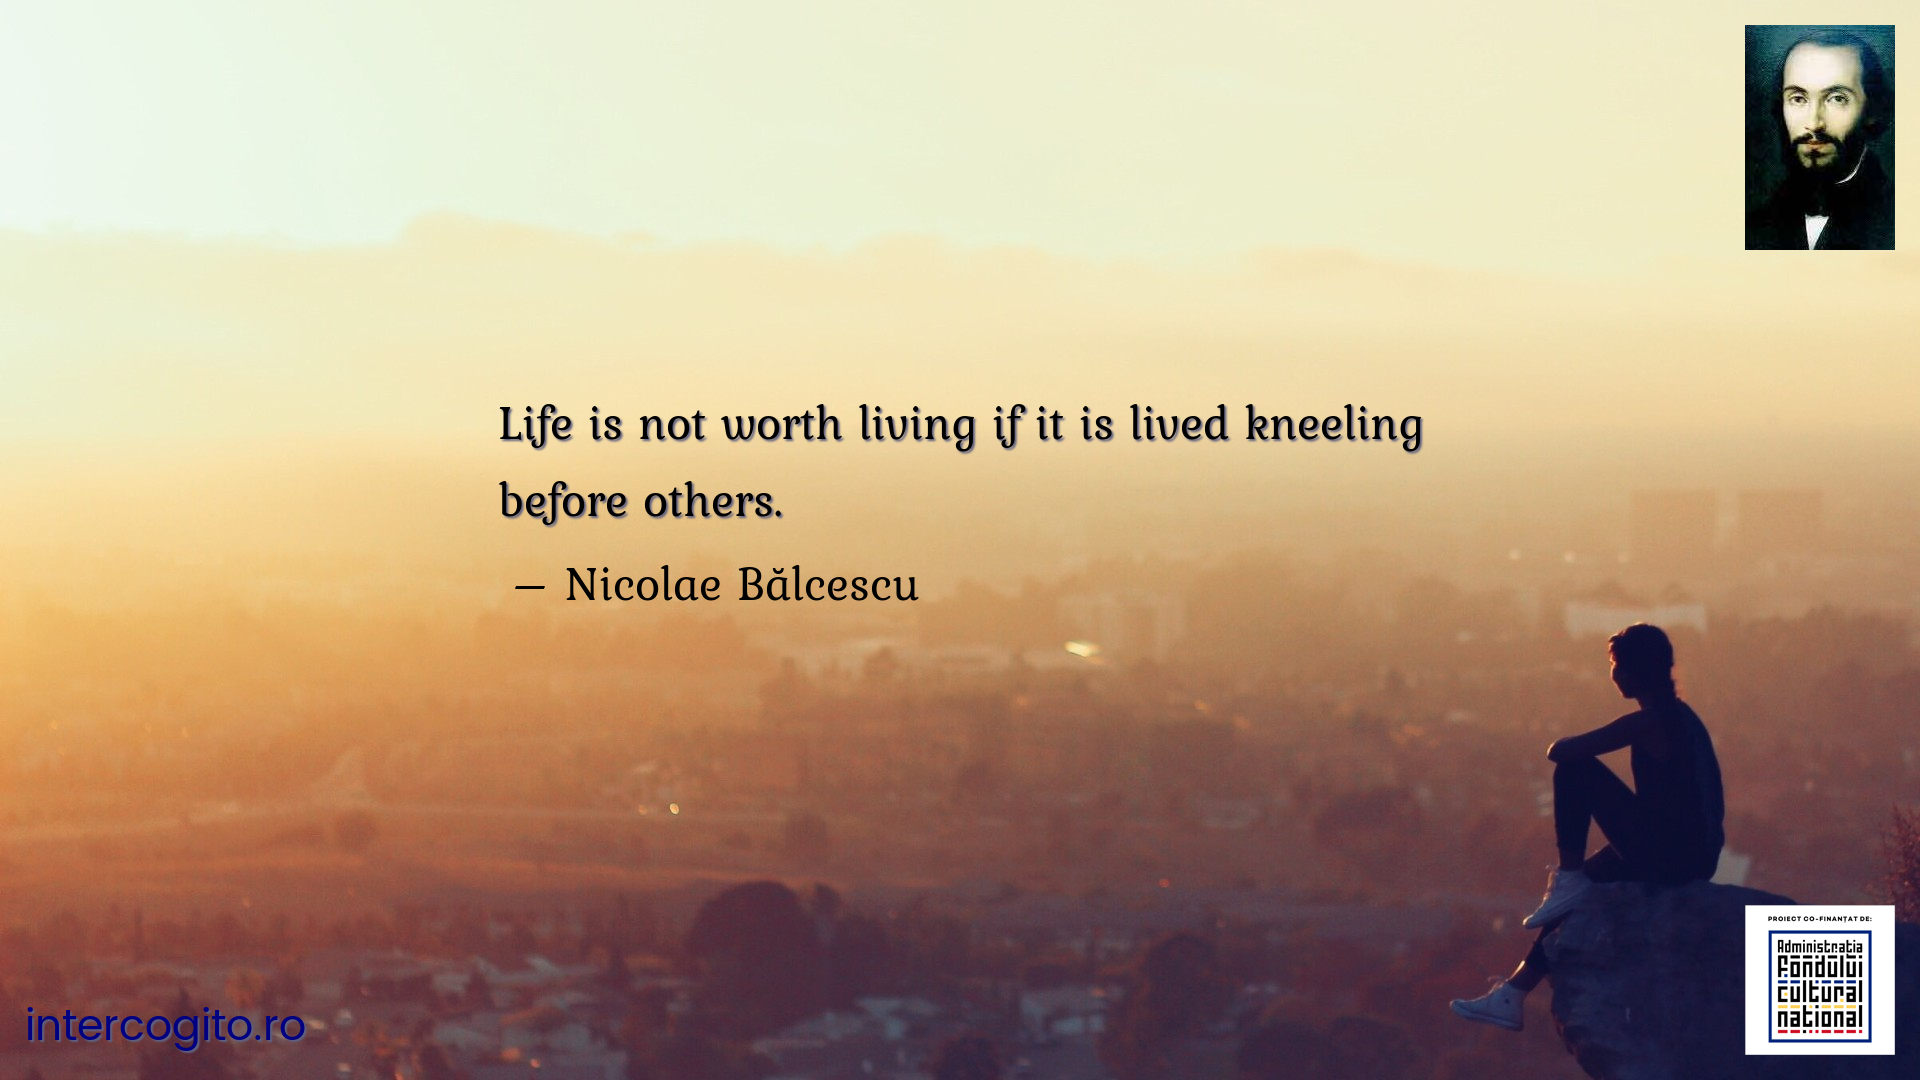 Life is not worth living if it is lived kneeling before others.